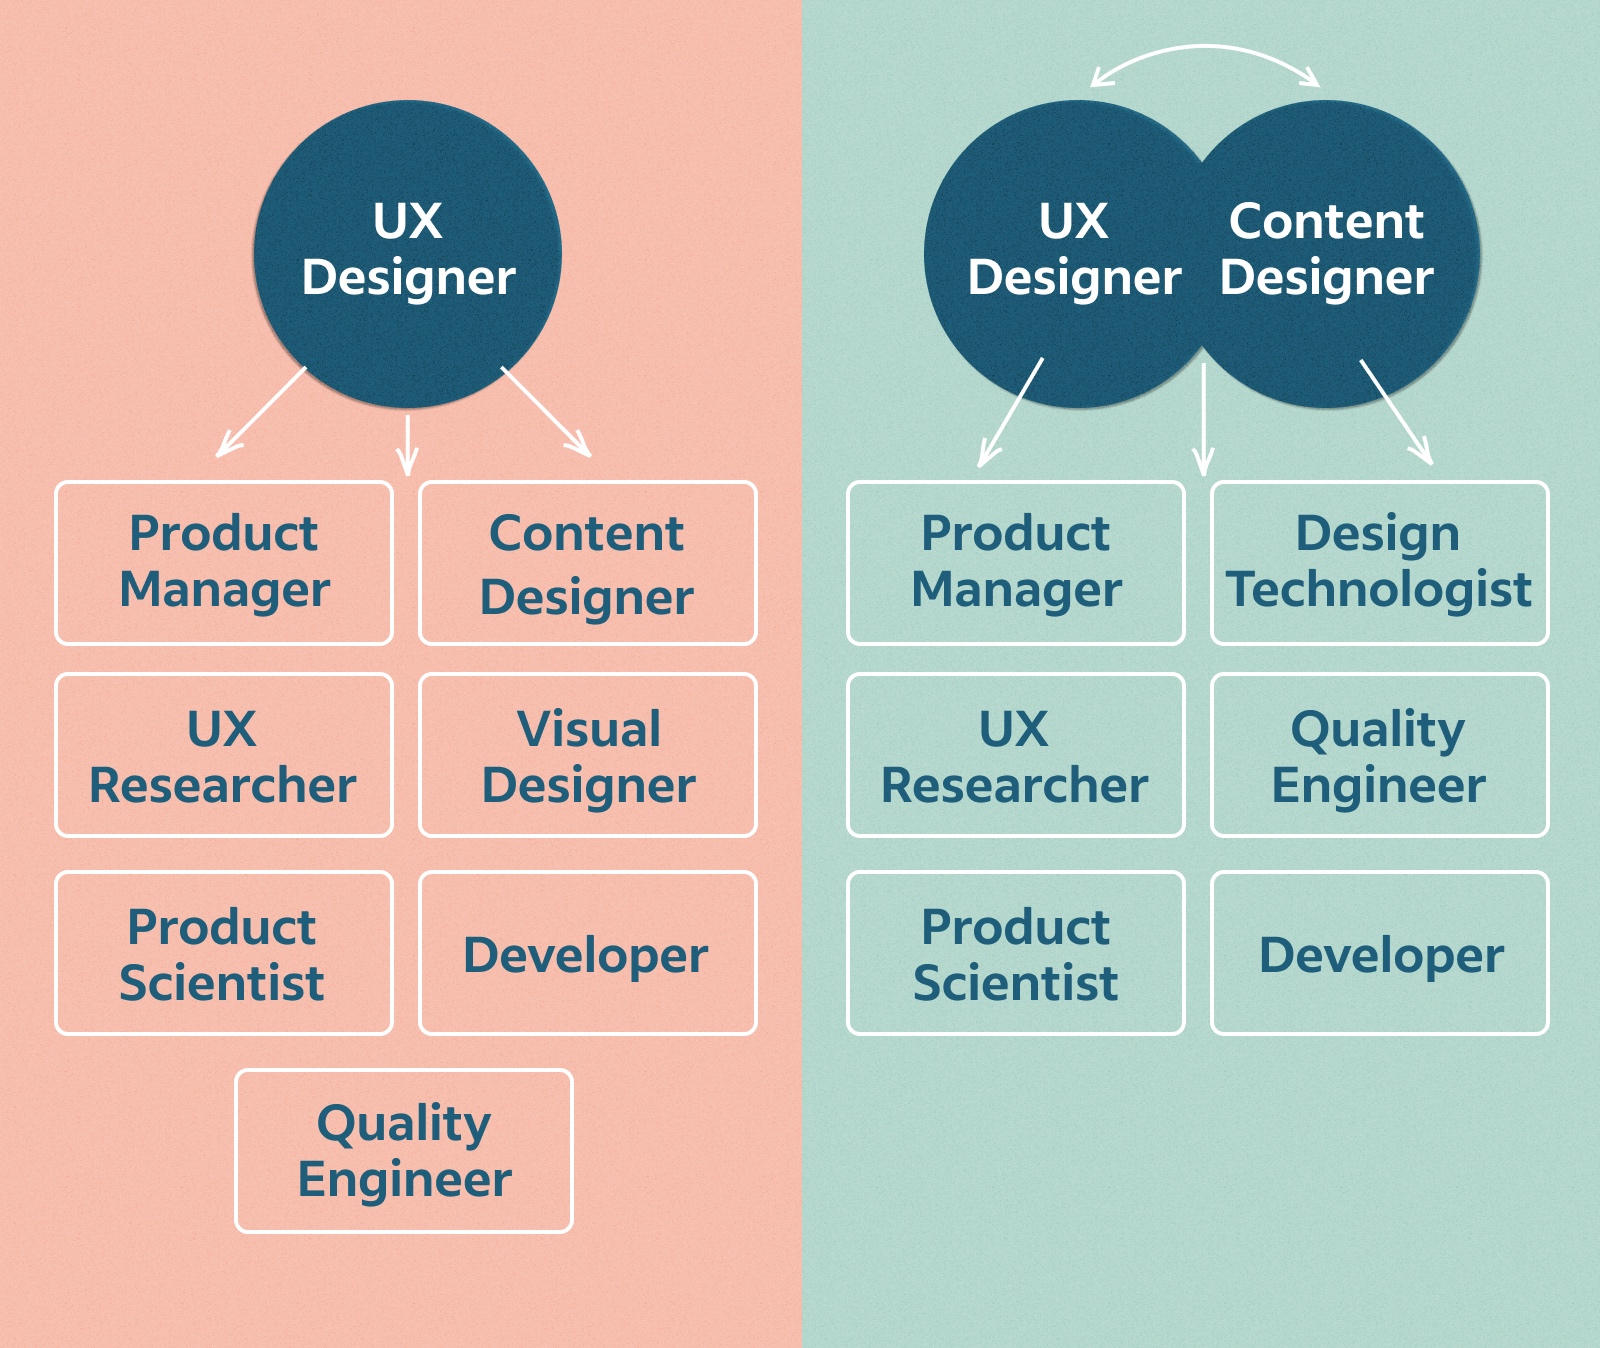 One diagram shows the UX Designer role title sitting above a row of titles the role may collaborate with. These are Product Manager, UX Writer, UX Researcher, Visual Designer, Product Scientist, Developer and Quality Engineer. A second shows the UX Designer role paired with Content Designer above the other titles, which they may collaborate with together.